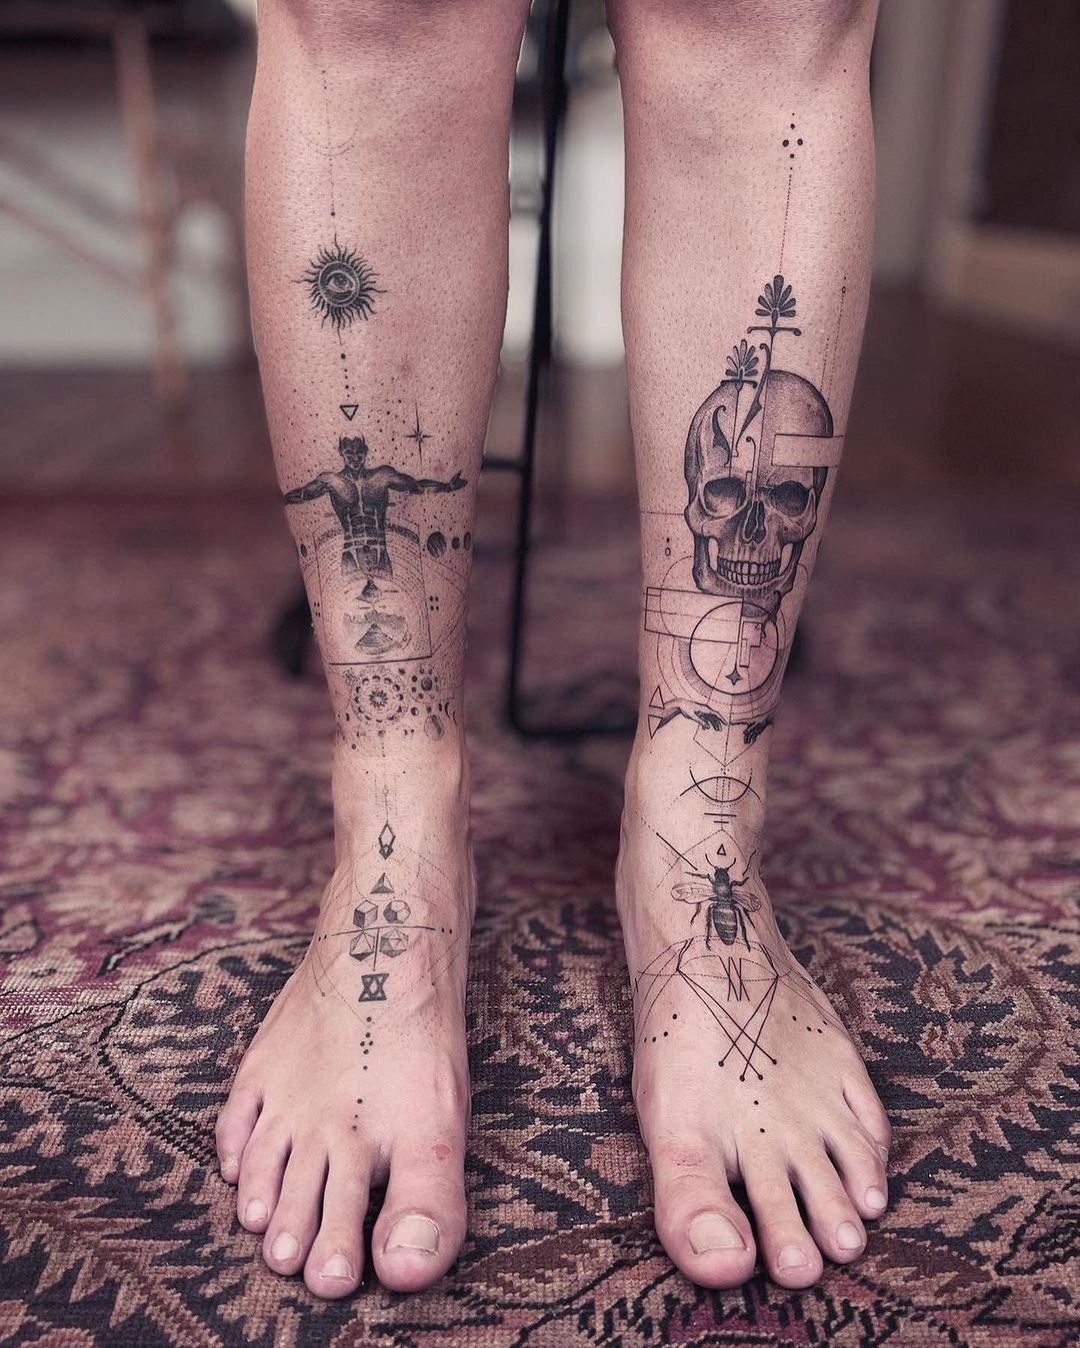 Spiritual Tattoos The Meaning Behind These 10 Symbols